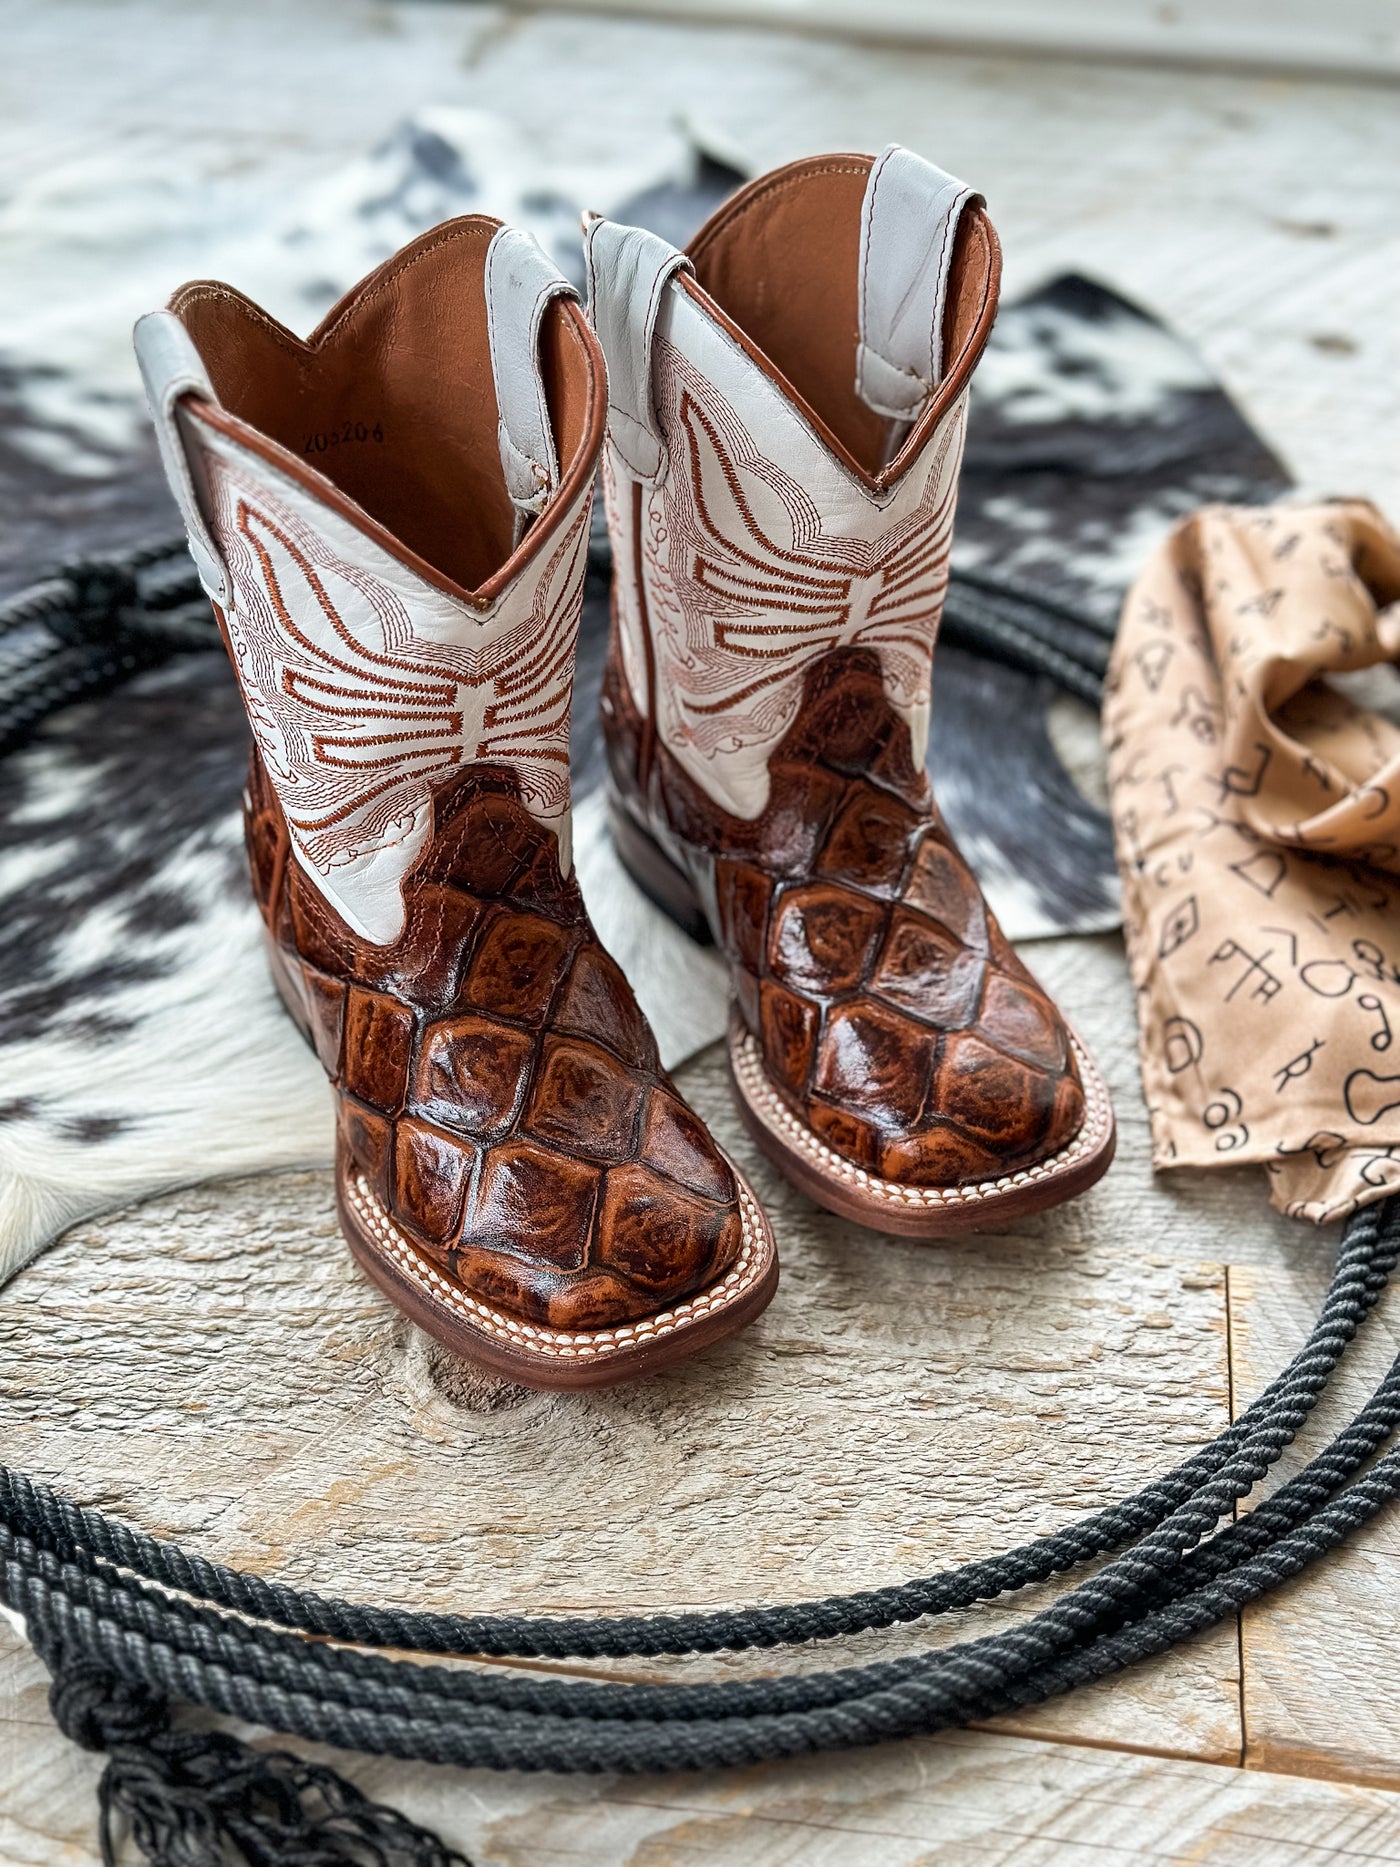 The McCoy Boots